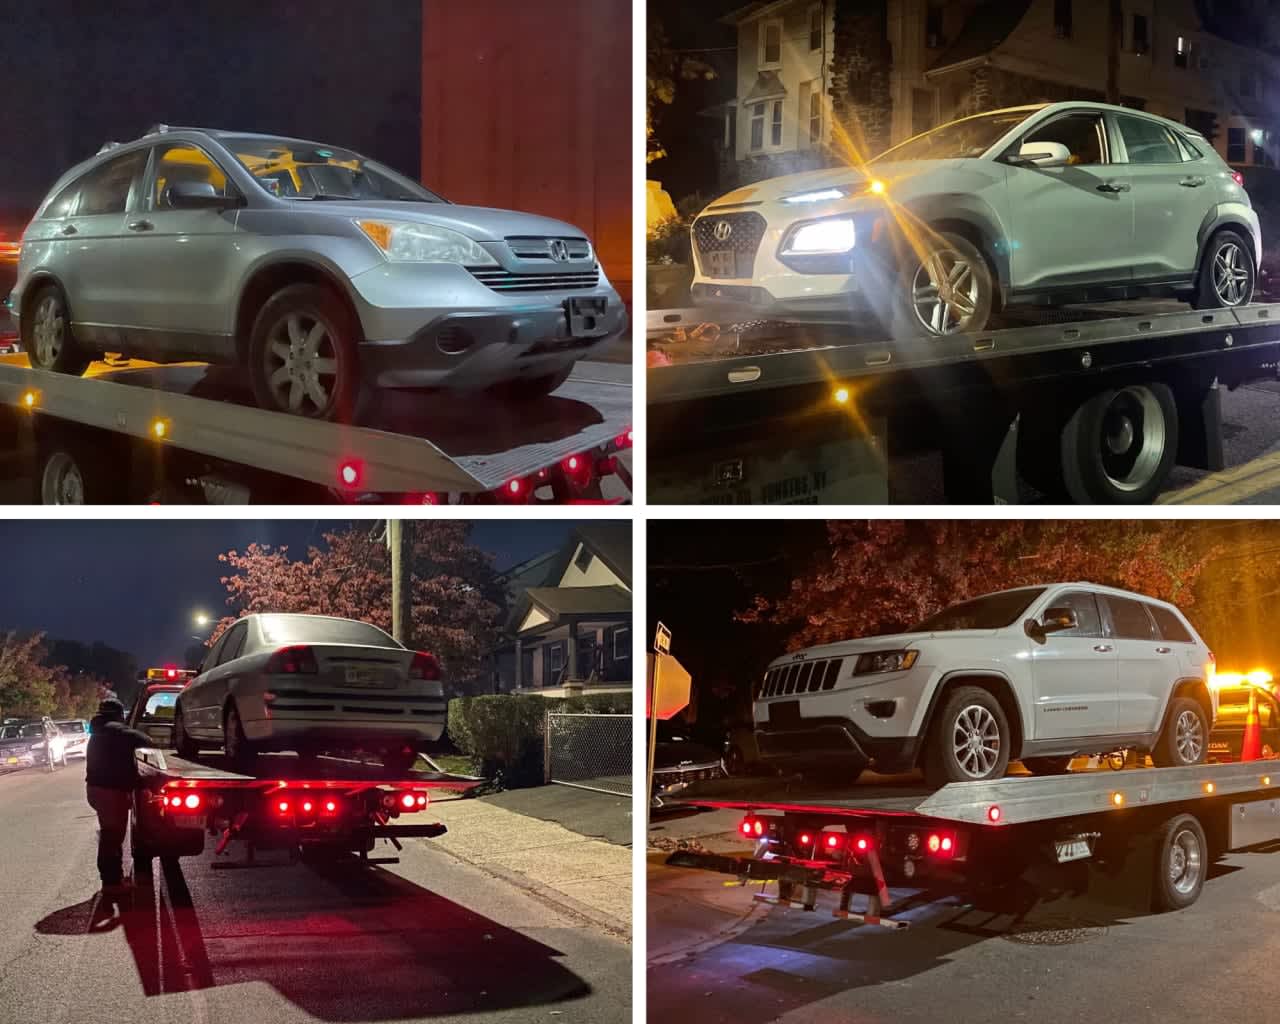 Police in Westchester County impounded more than forty vehicles after conducting a vehicle and traffic enforcement detail.